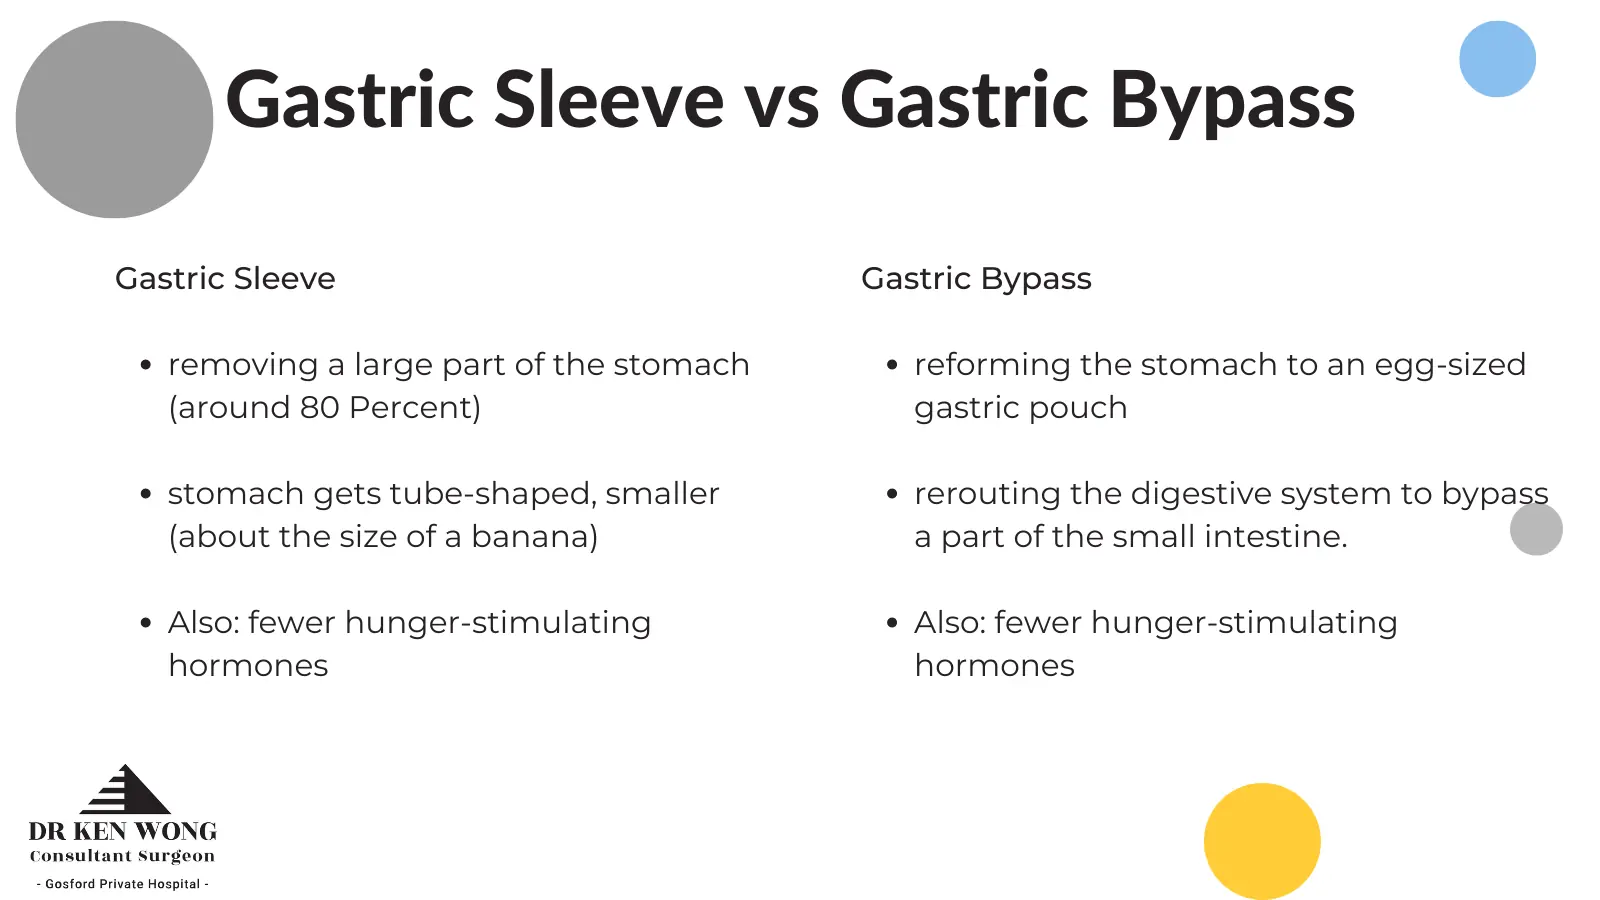 Gastric bypass after gastric sleeve